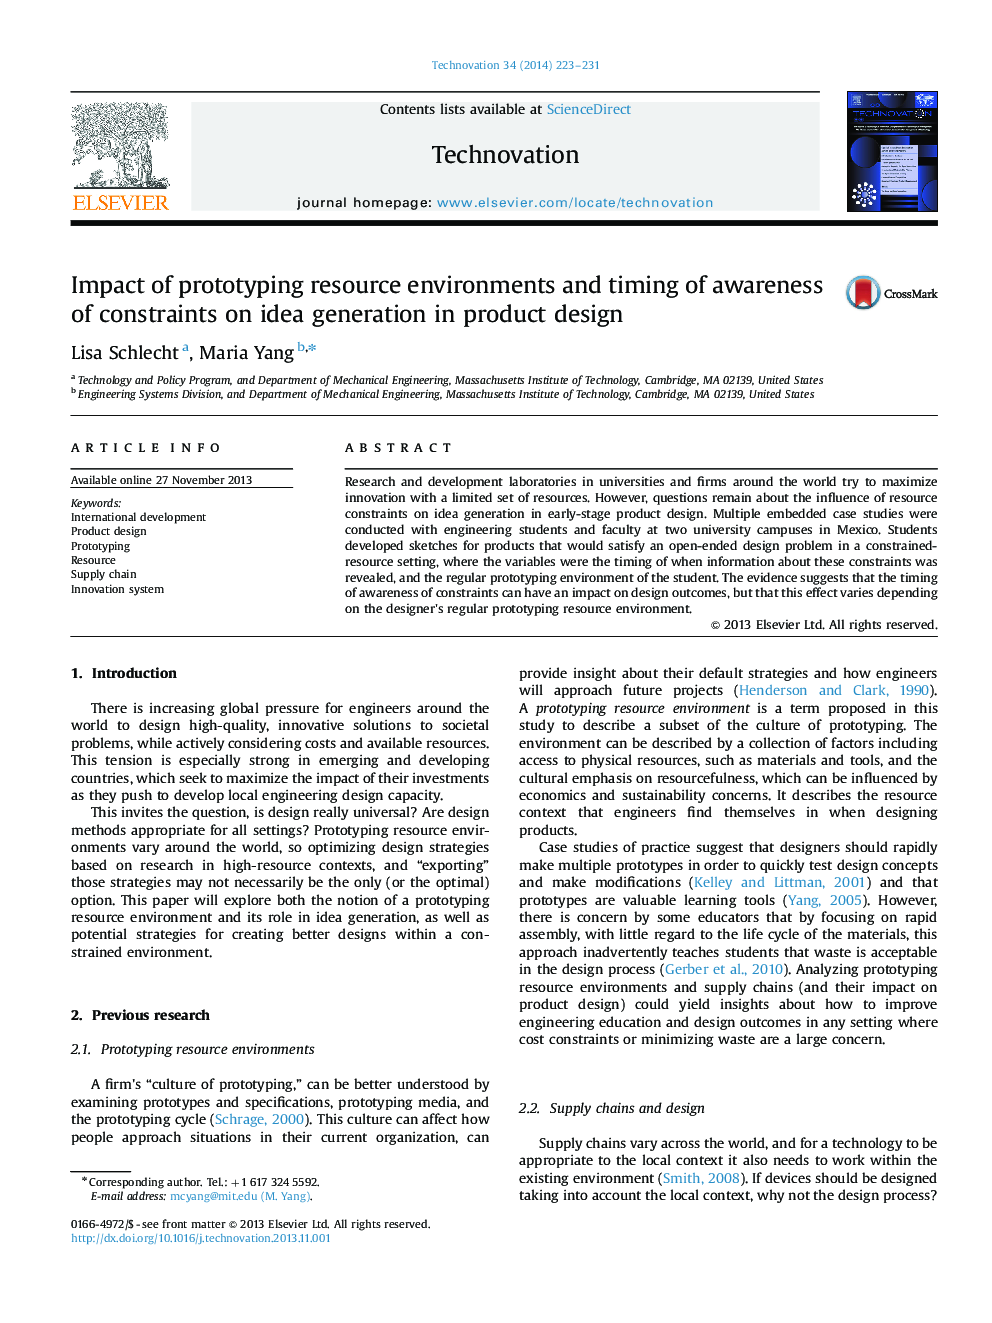 Impact of prototyping resource environments and timing of awareness of constraints on idea generation in product design